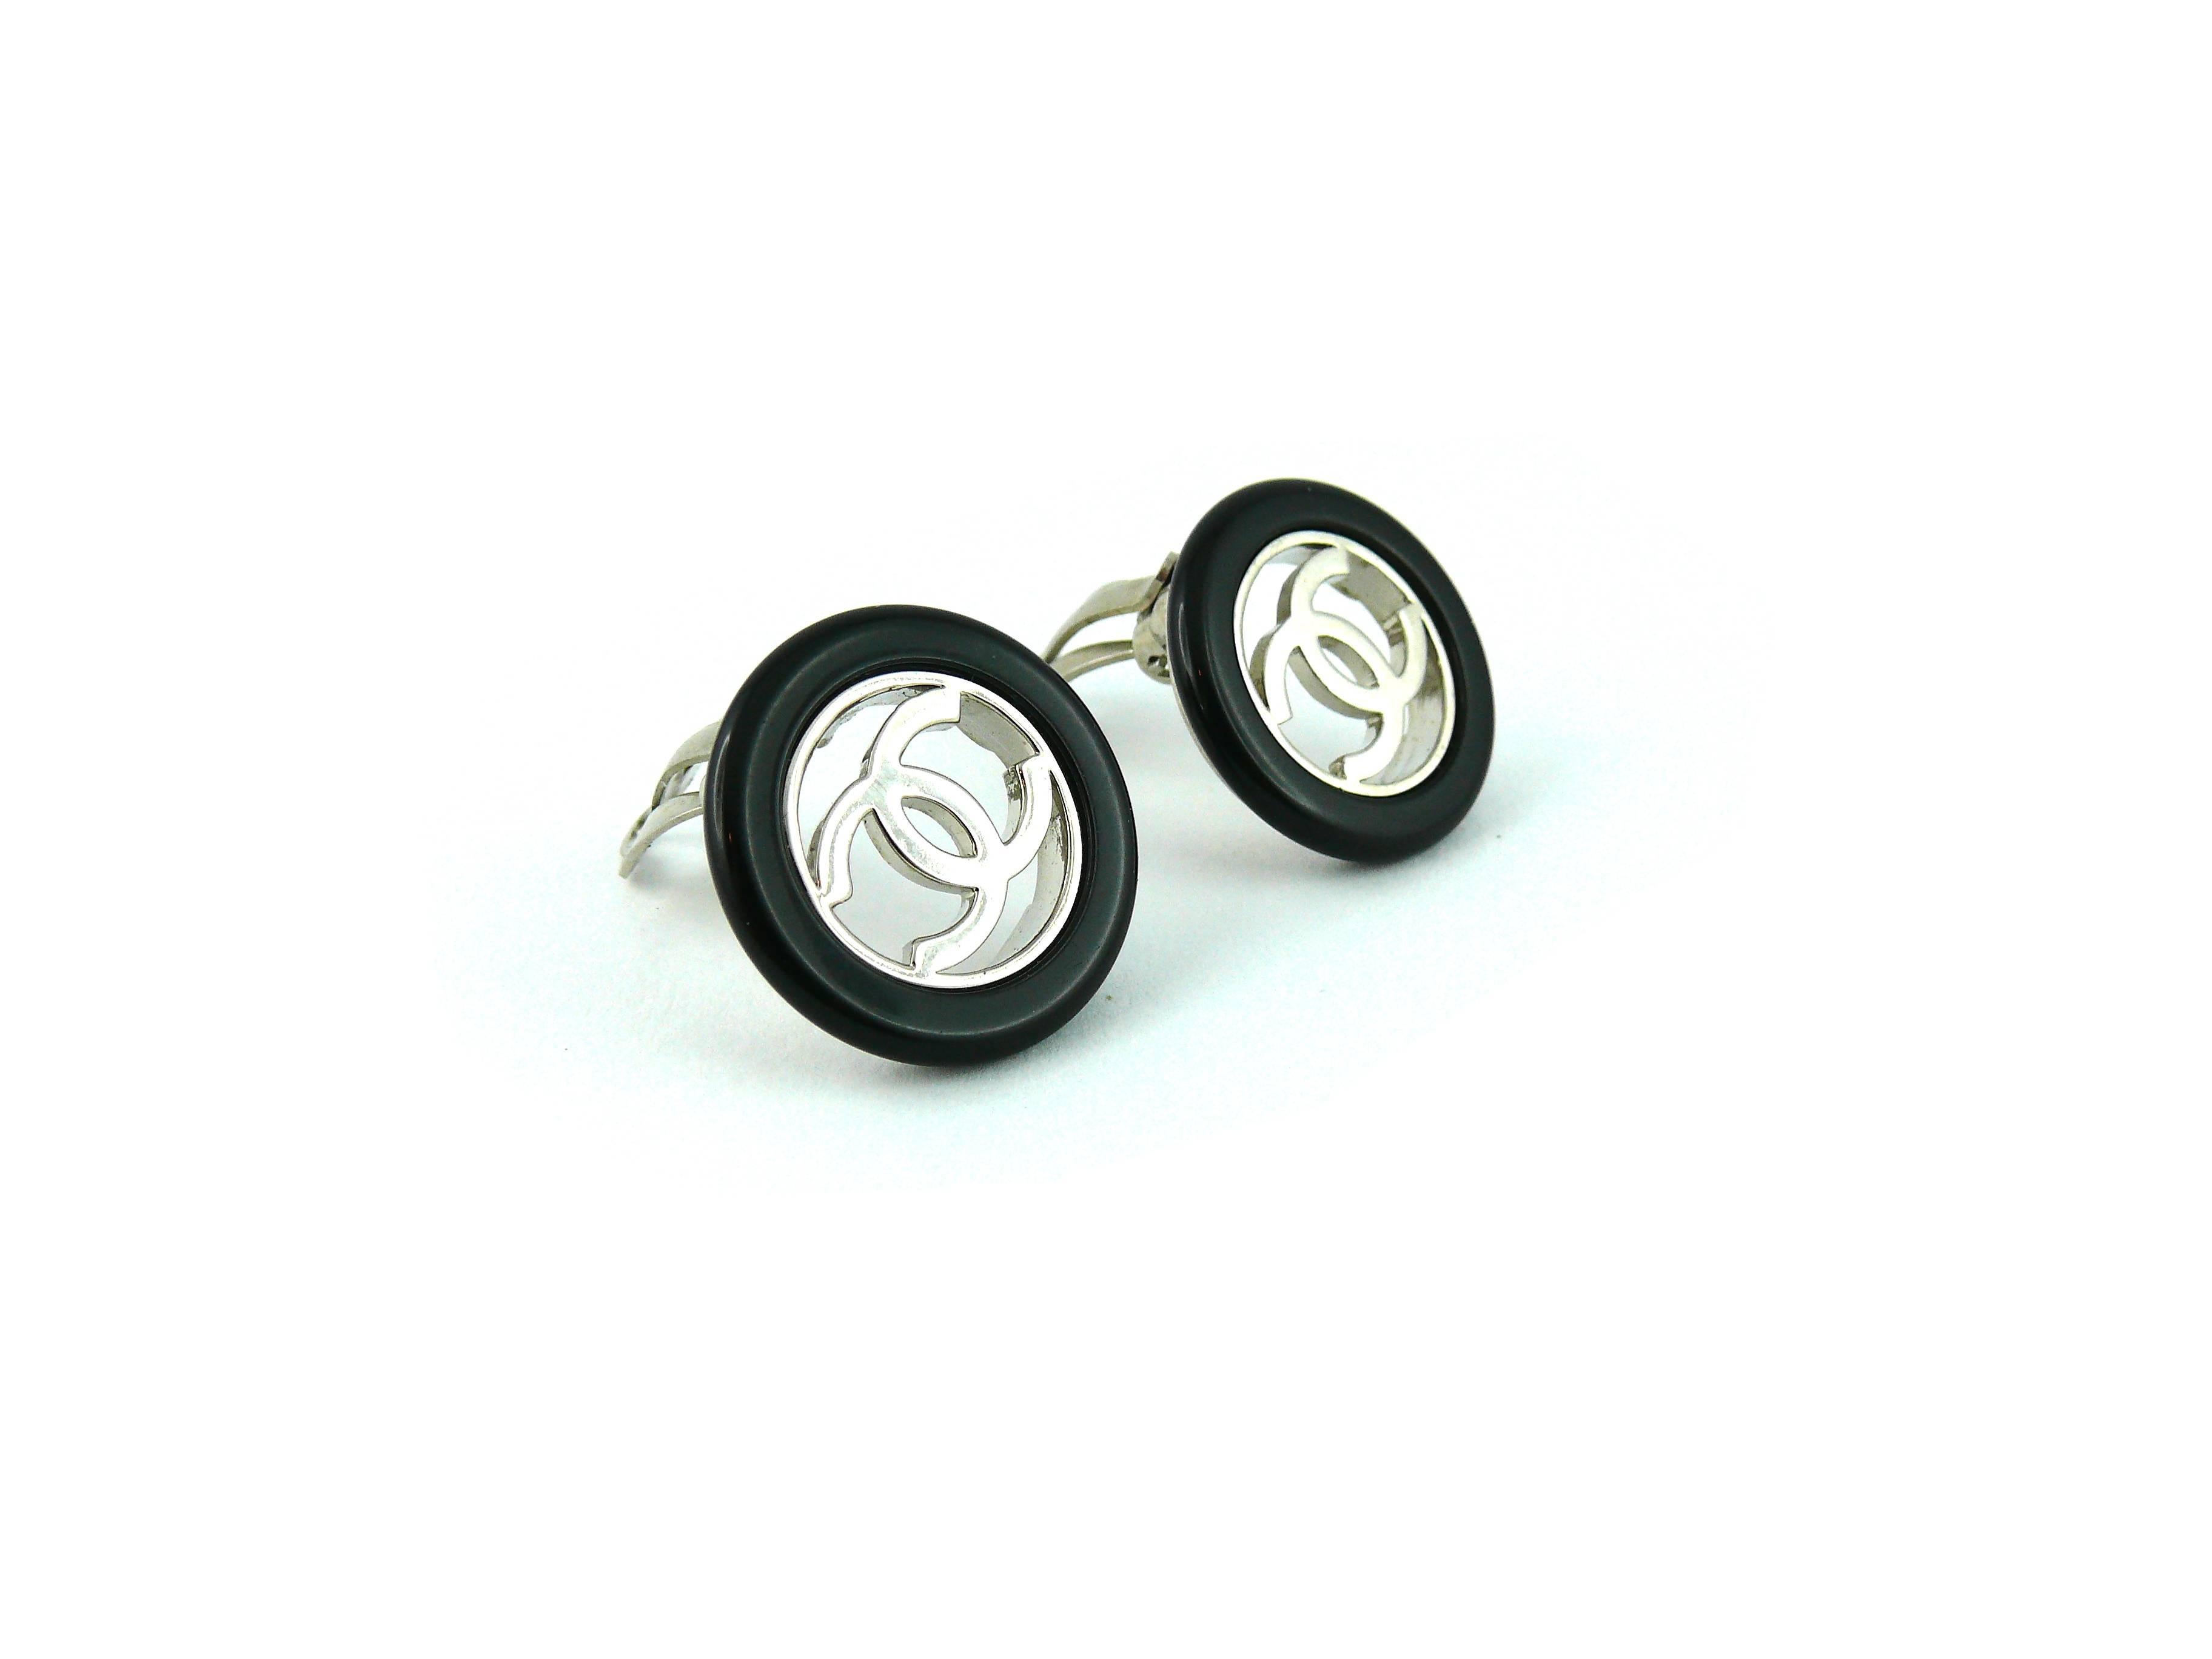 CHANEL vintage clip-on earrings featuring an openwork silver tone CC logo surrounded by a black resin ring.

Fall 1997 Collection.

Marked Chanel 97 A Made in France.

JEWELRY CONDITION CHART
- New or never worn : item is in pristine